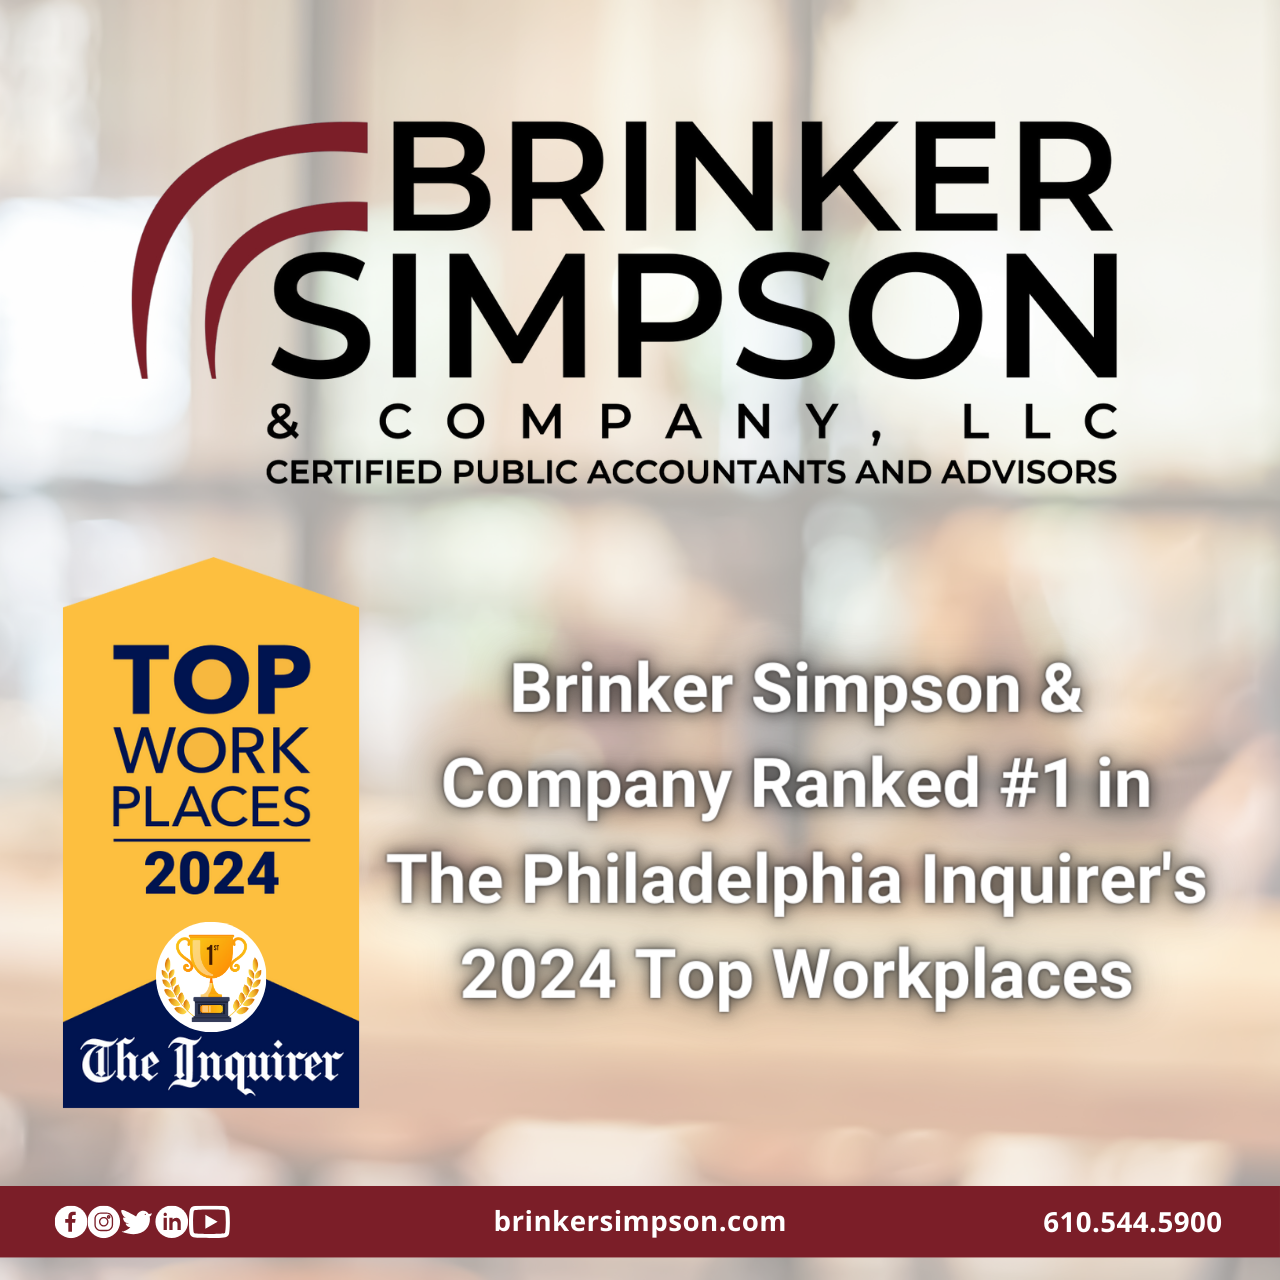 Brinker Simpson Ranked #1 in Inquirer's Top Workplaces for 2024